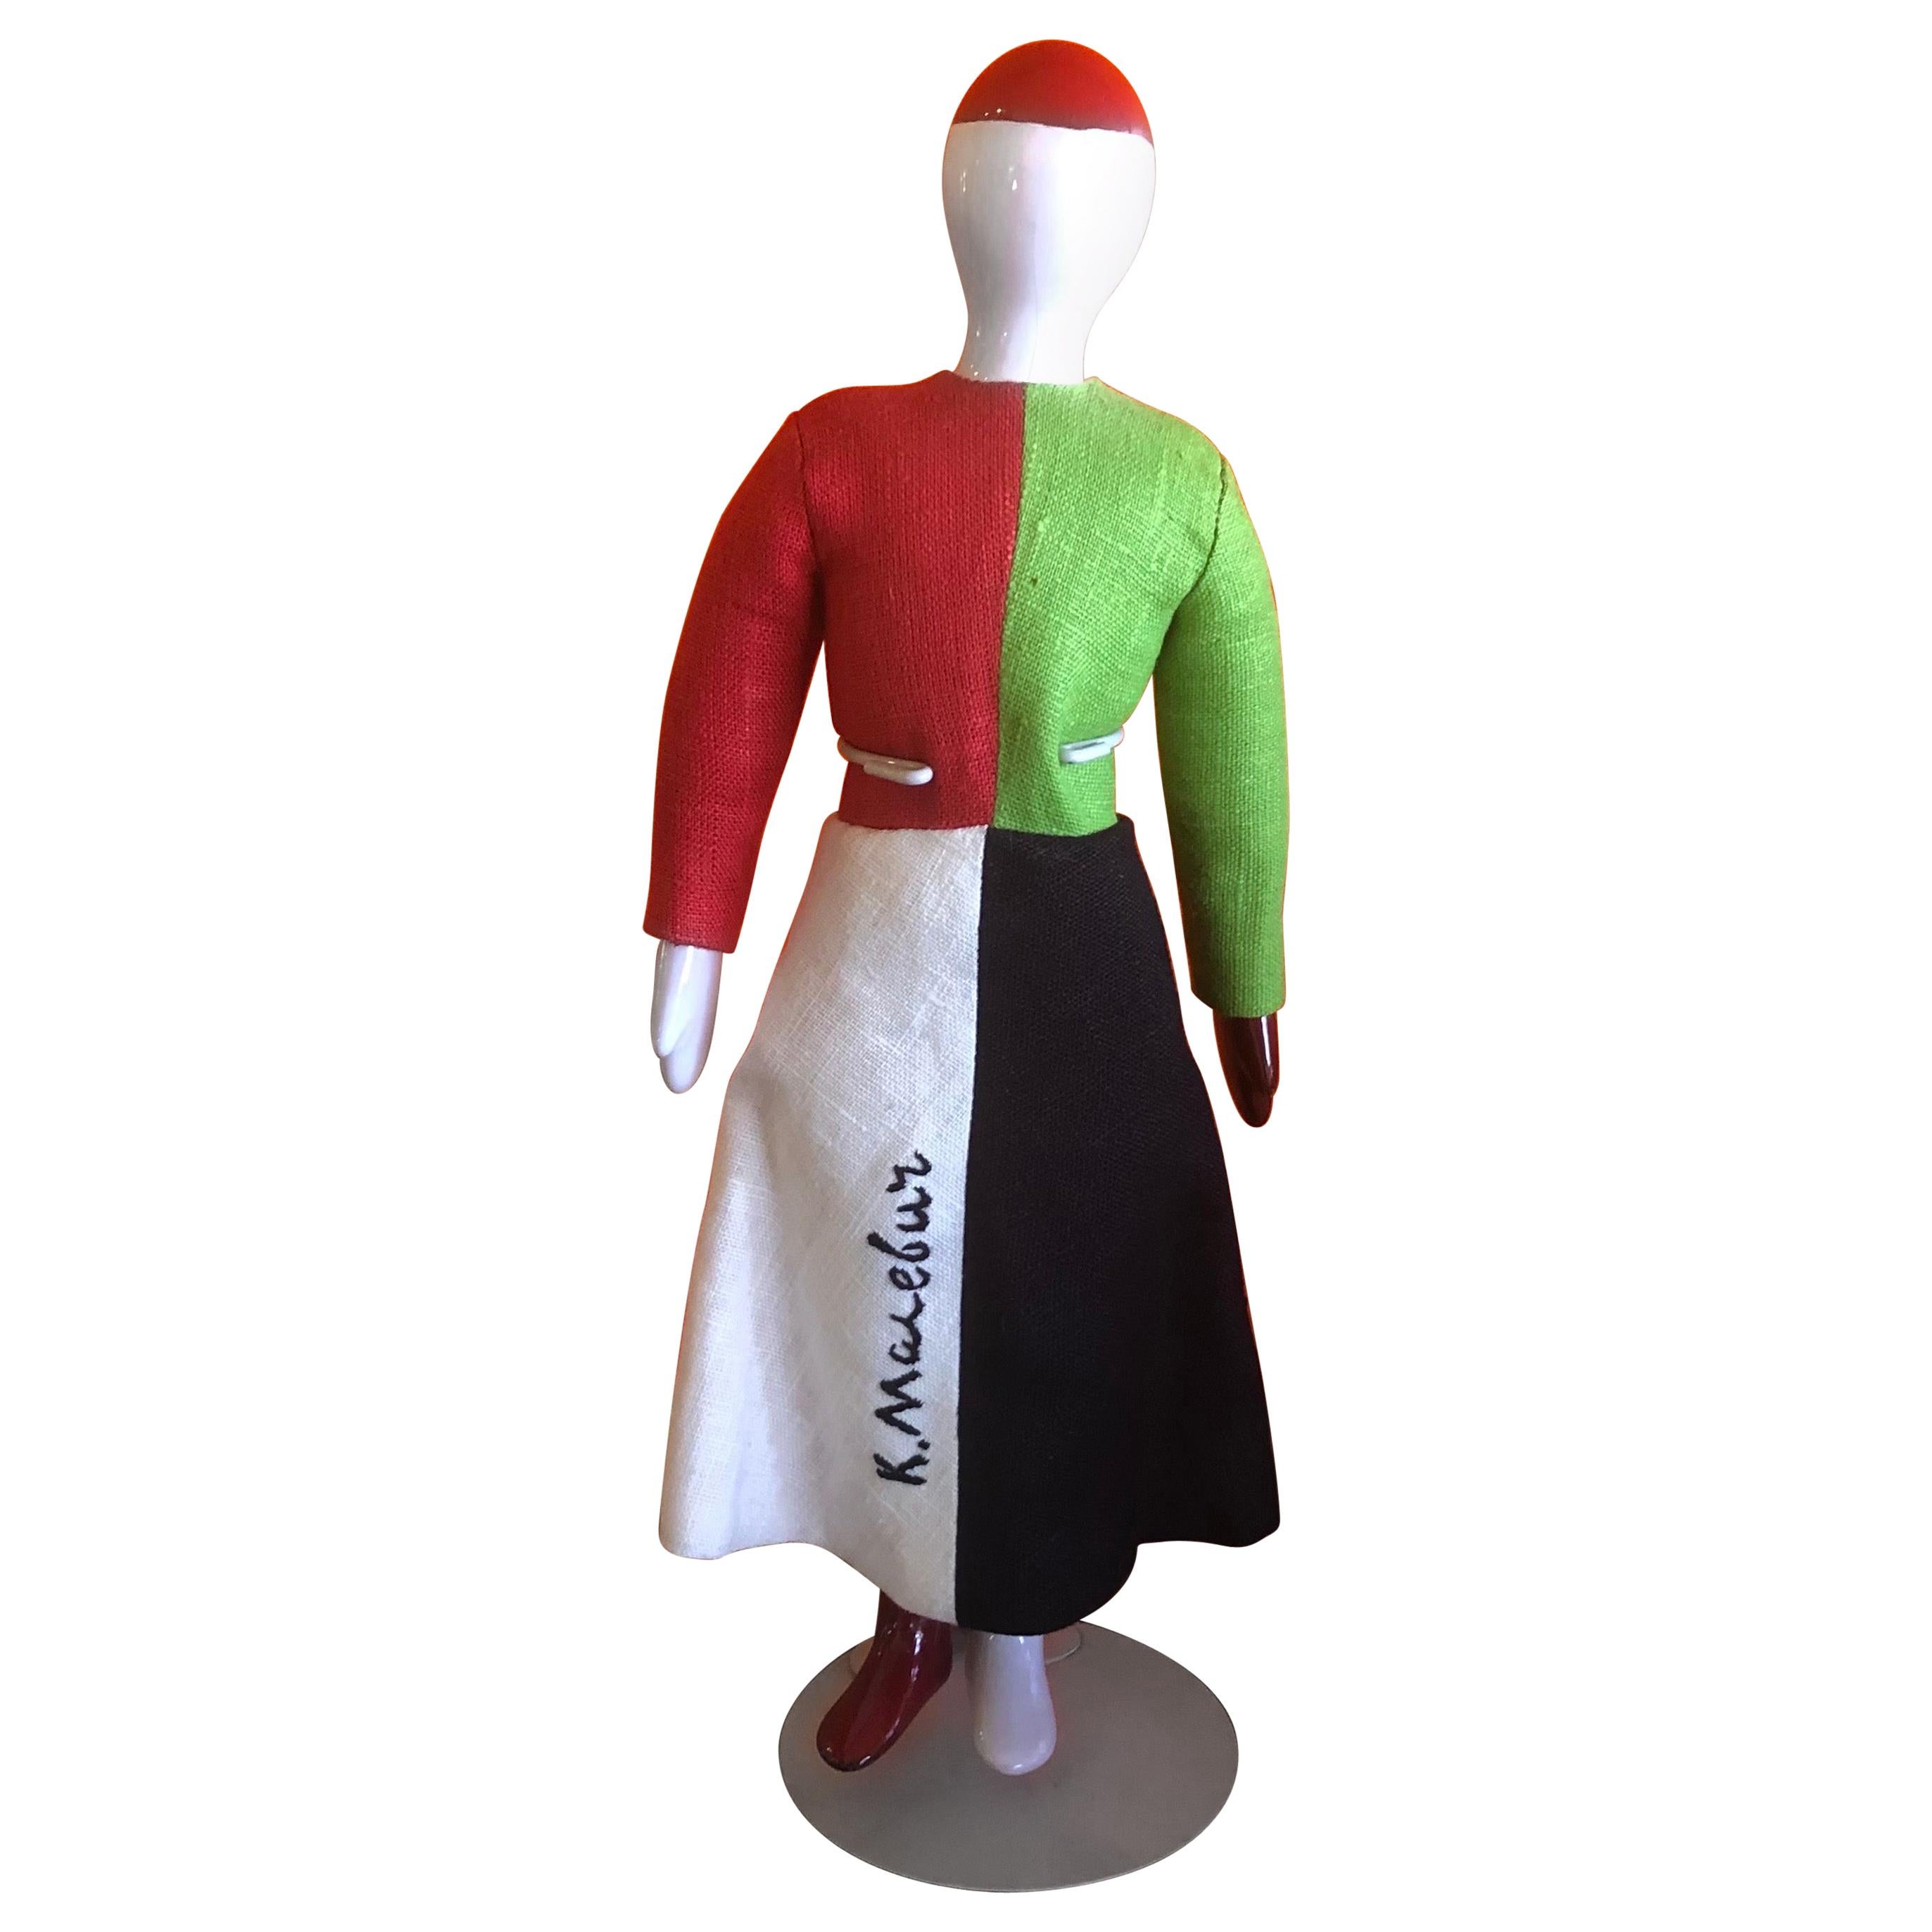 Porcelain and Linen Russian Avante Garde Doll with Stand by Kazimir Malevich